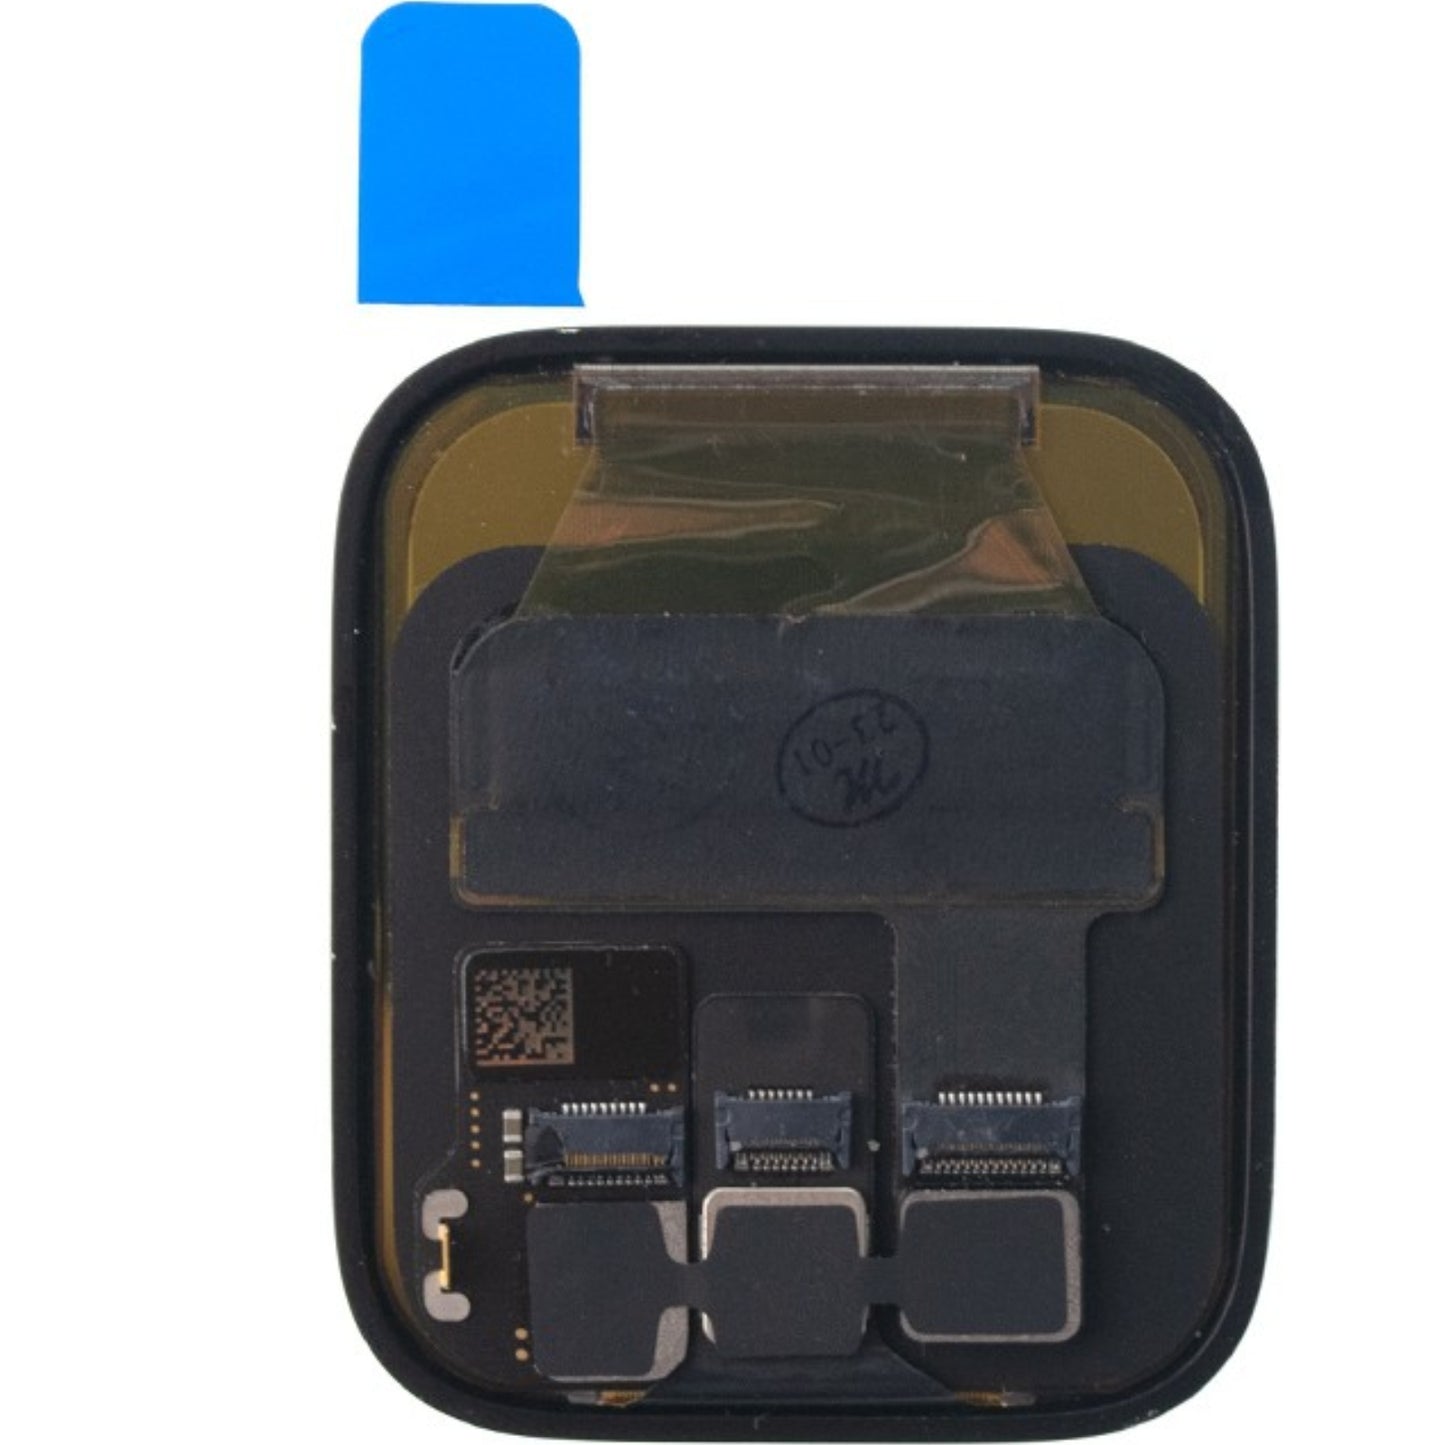 OLED and Digitizer Assembly for Apple Watch Series 4 (44mm) (PULL-A) Screen Replacement